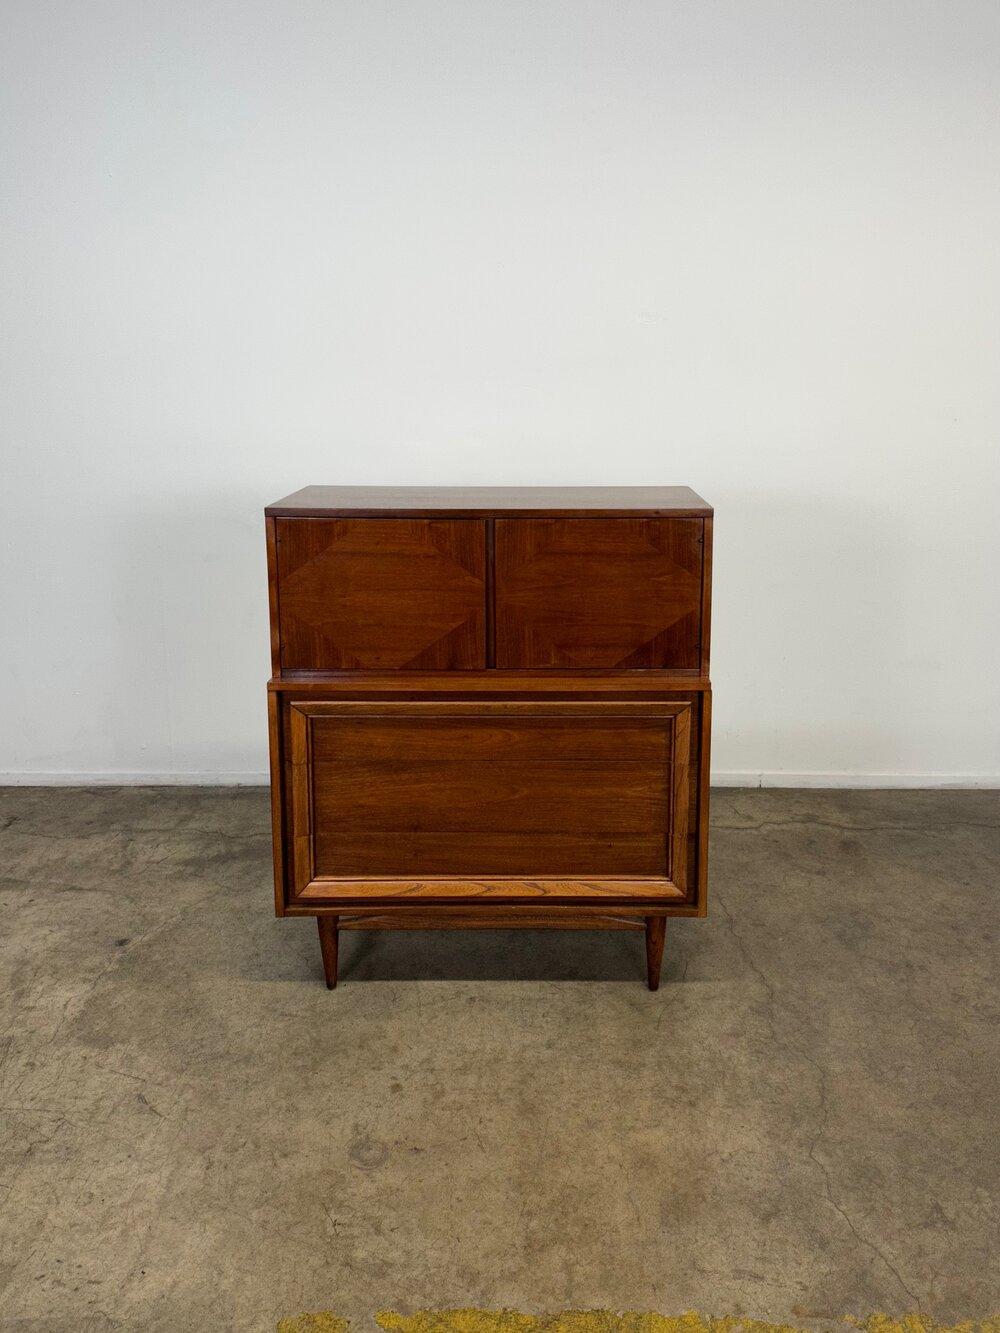 Measures: W40 D17.5 H46.5.

Restored midcentury Higboy by Basic Witz. Higboy has no major areas of wear and overall shows well. Item features sculptural handles and nice cross grain areas of detail. Higboy is structurally sound and fully